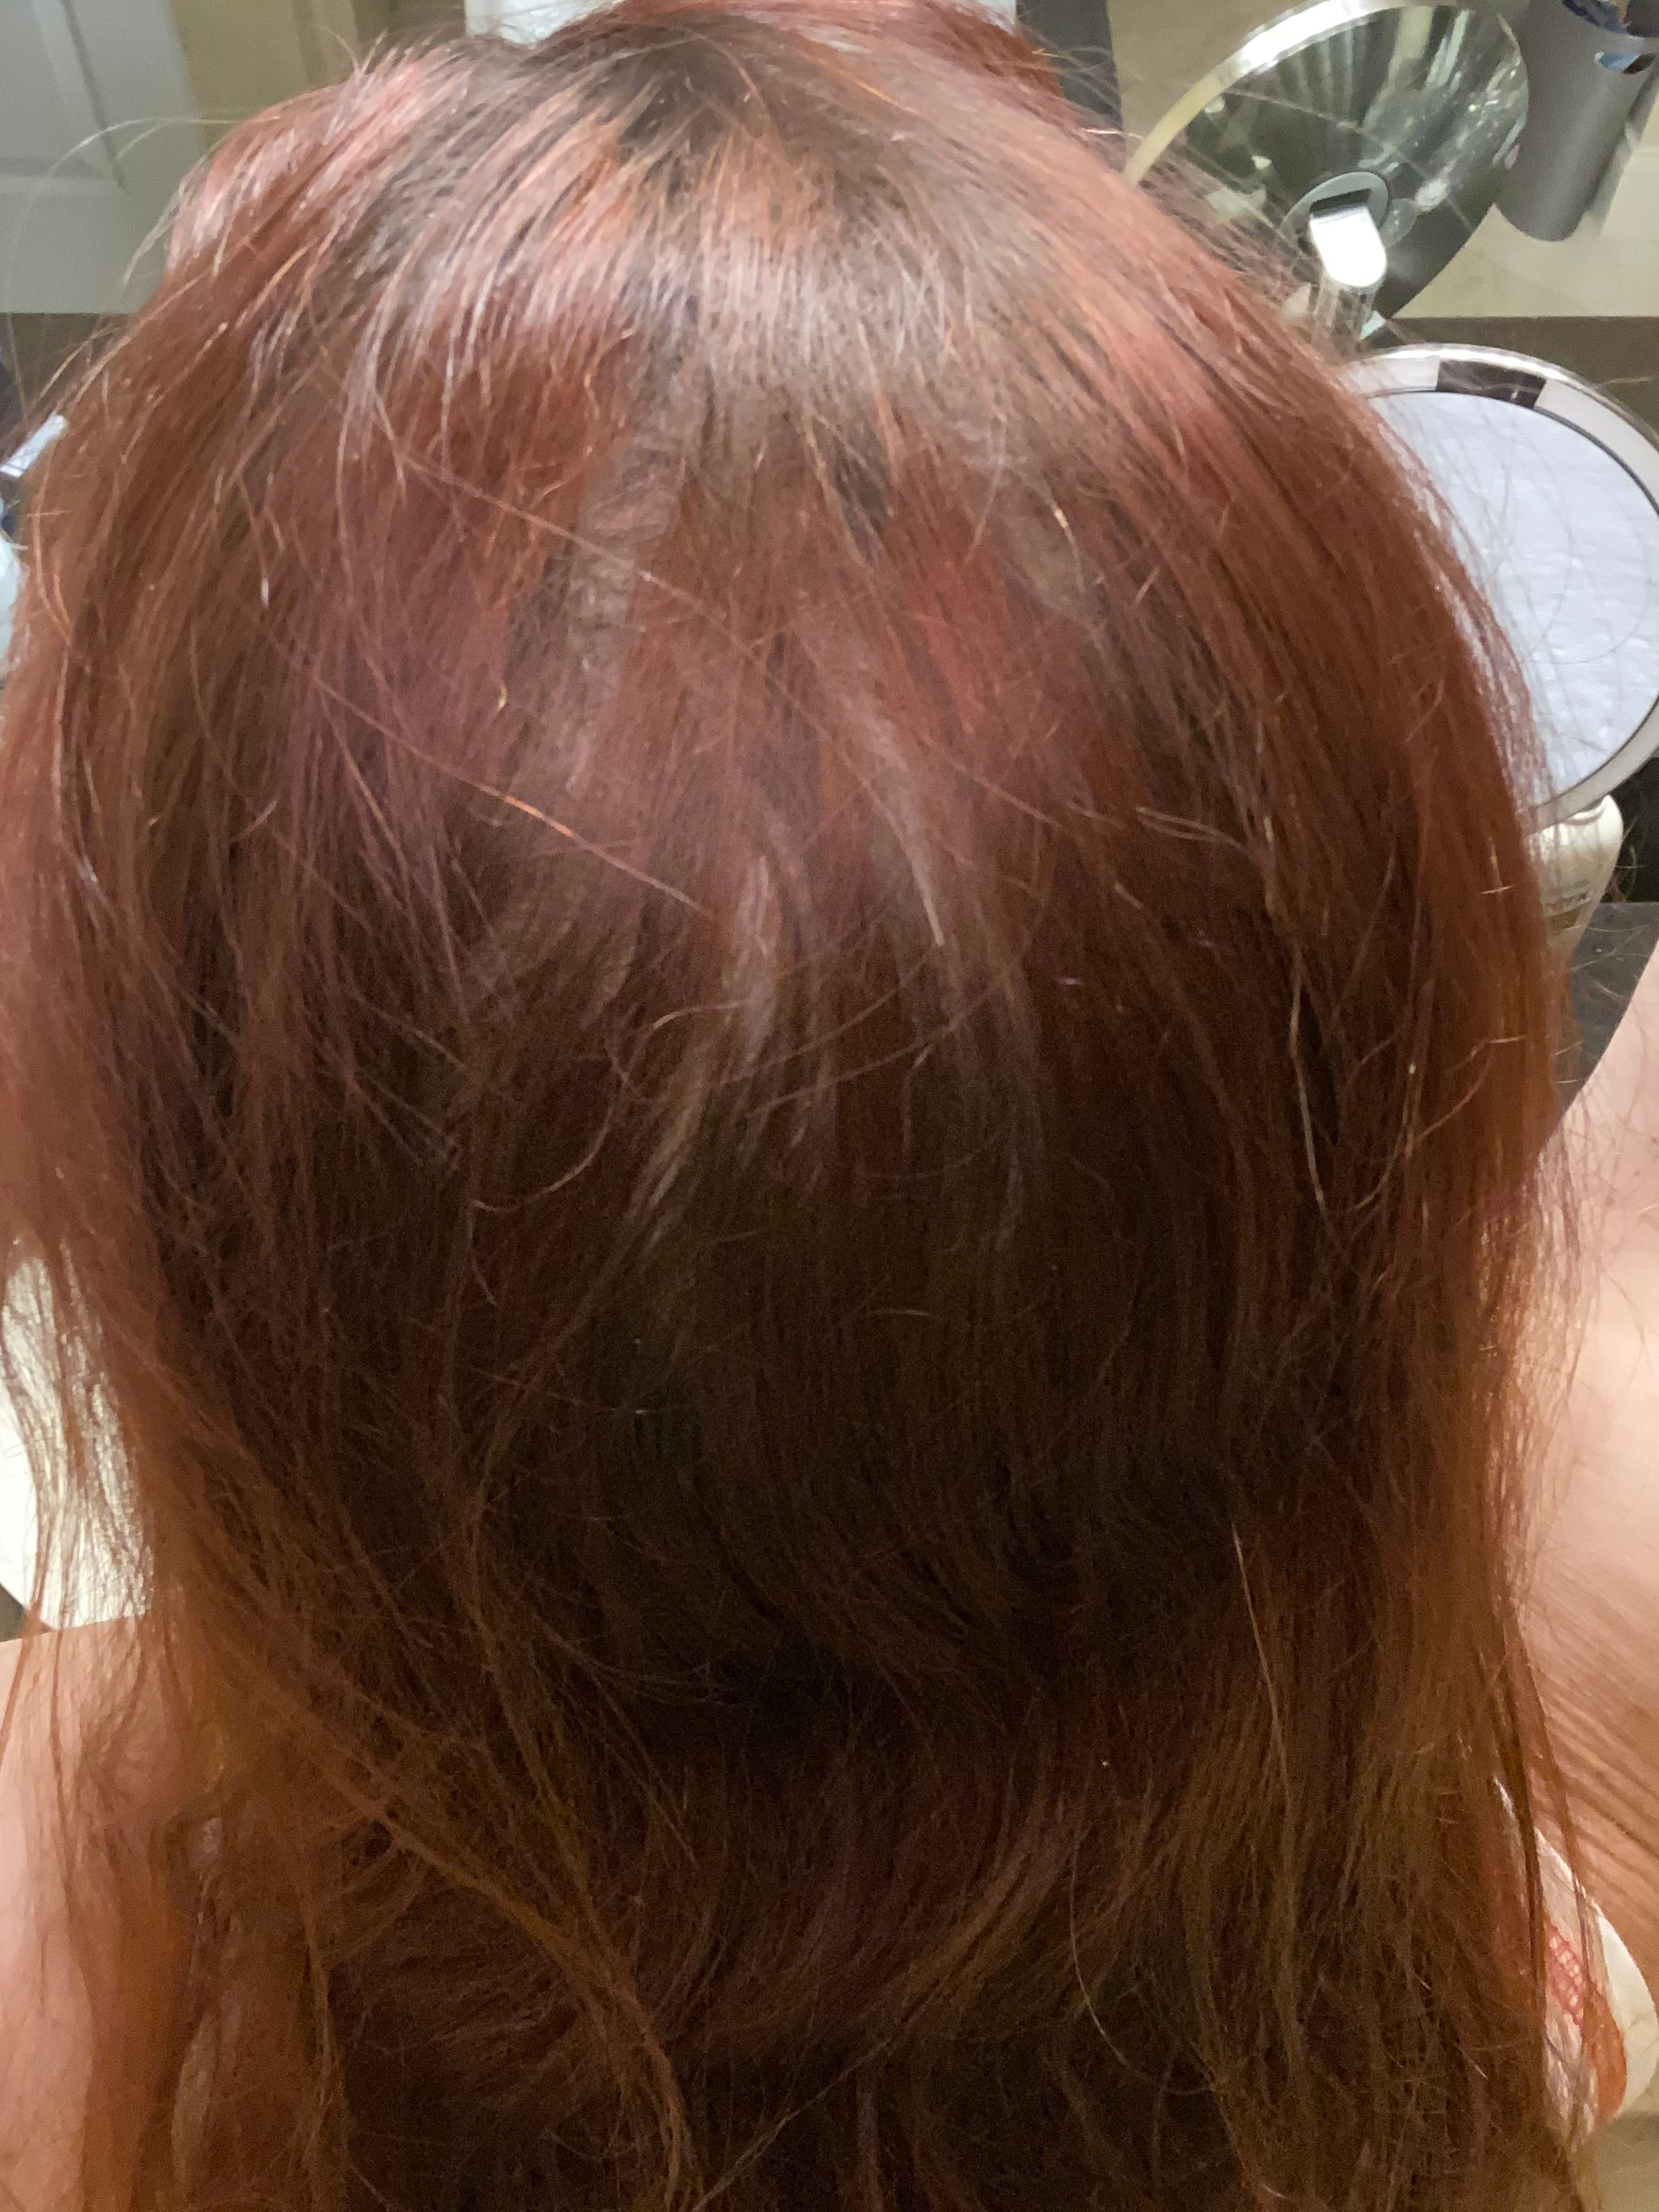 Re: RE: Olaplex 3 and hair loss? - Page 39 - Beauty Insider Community